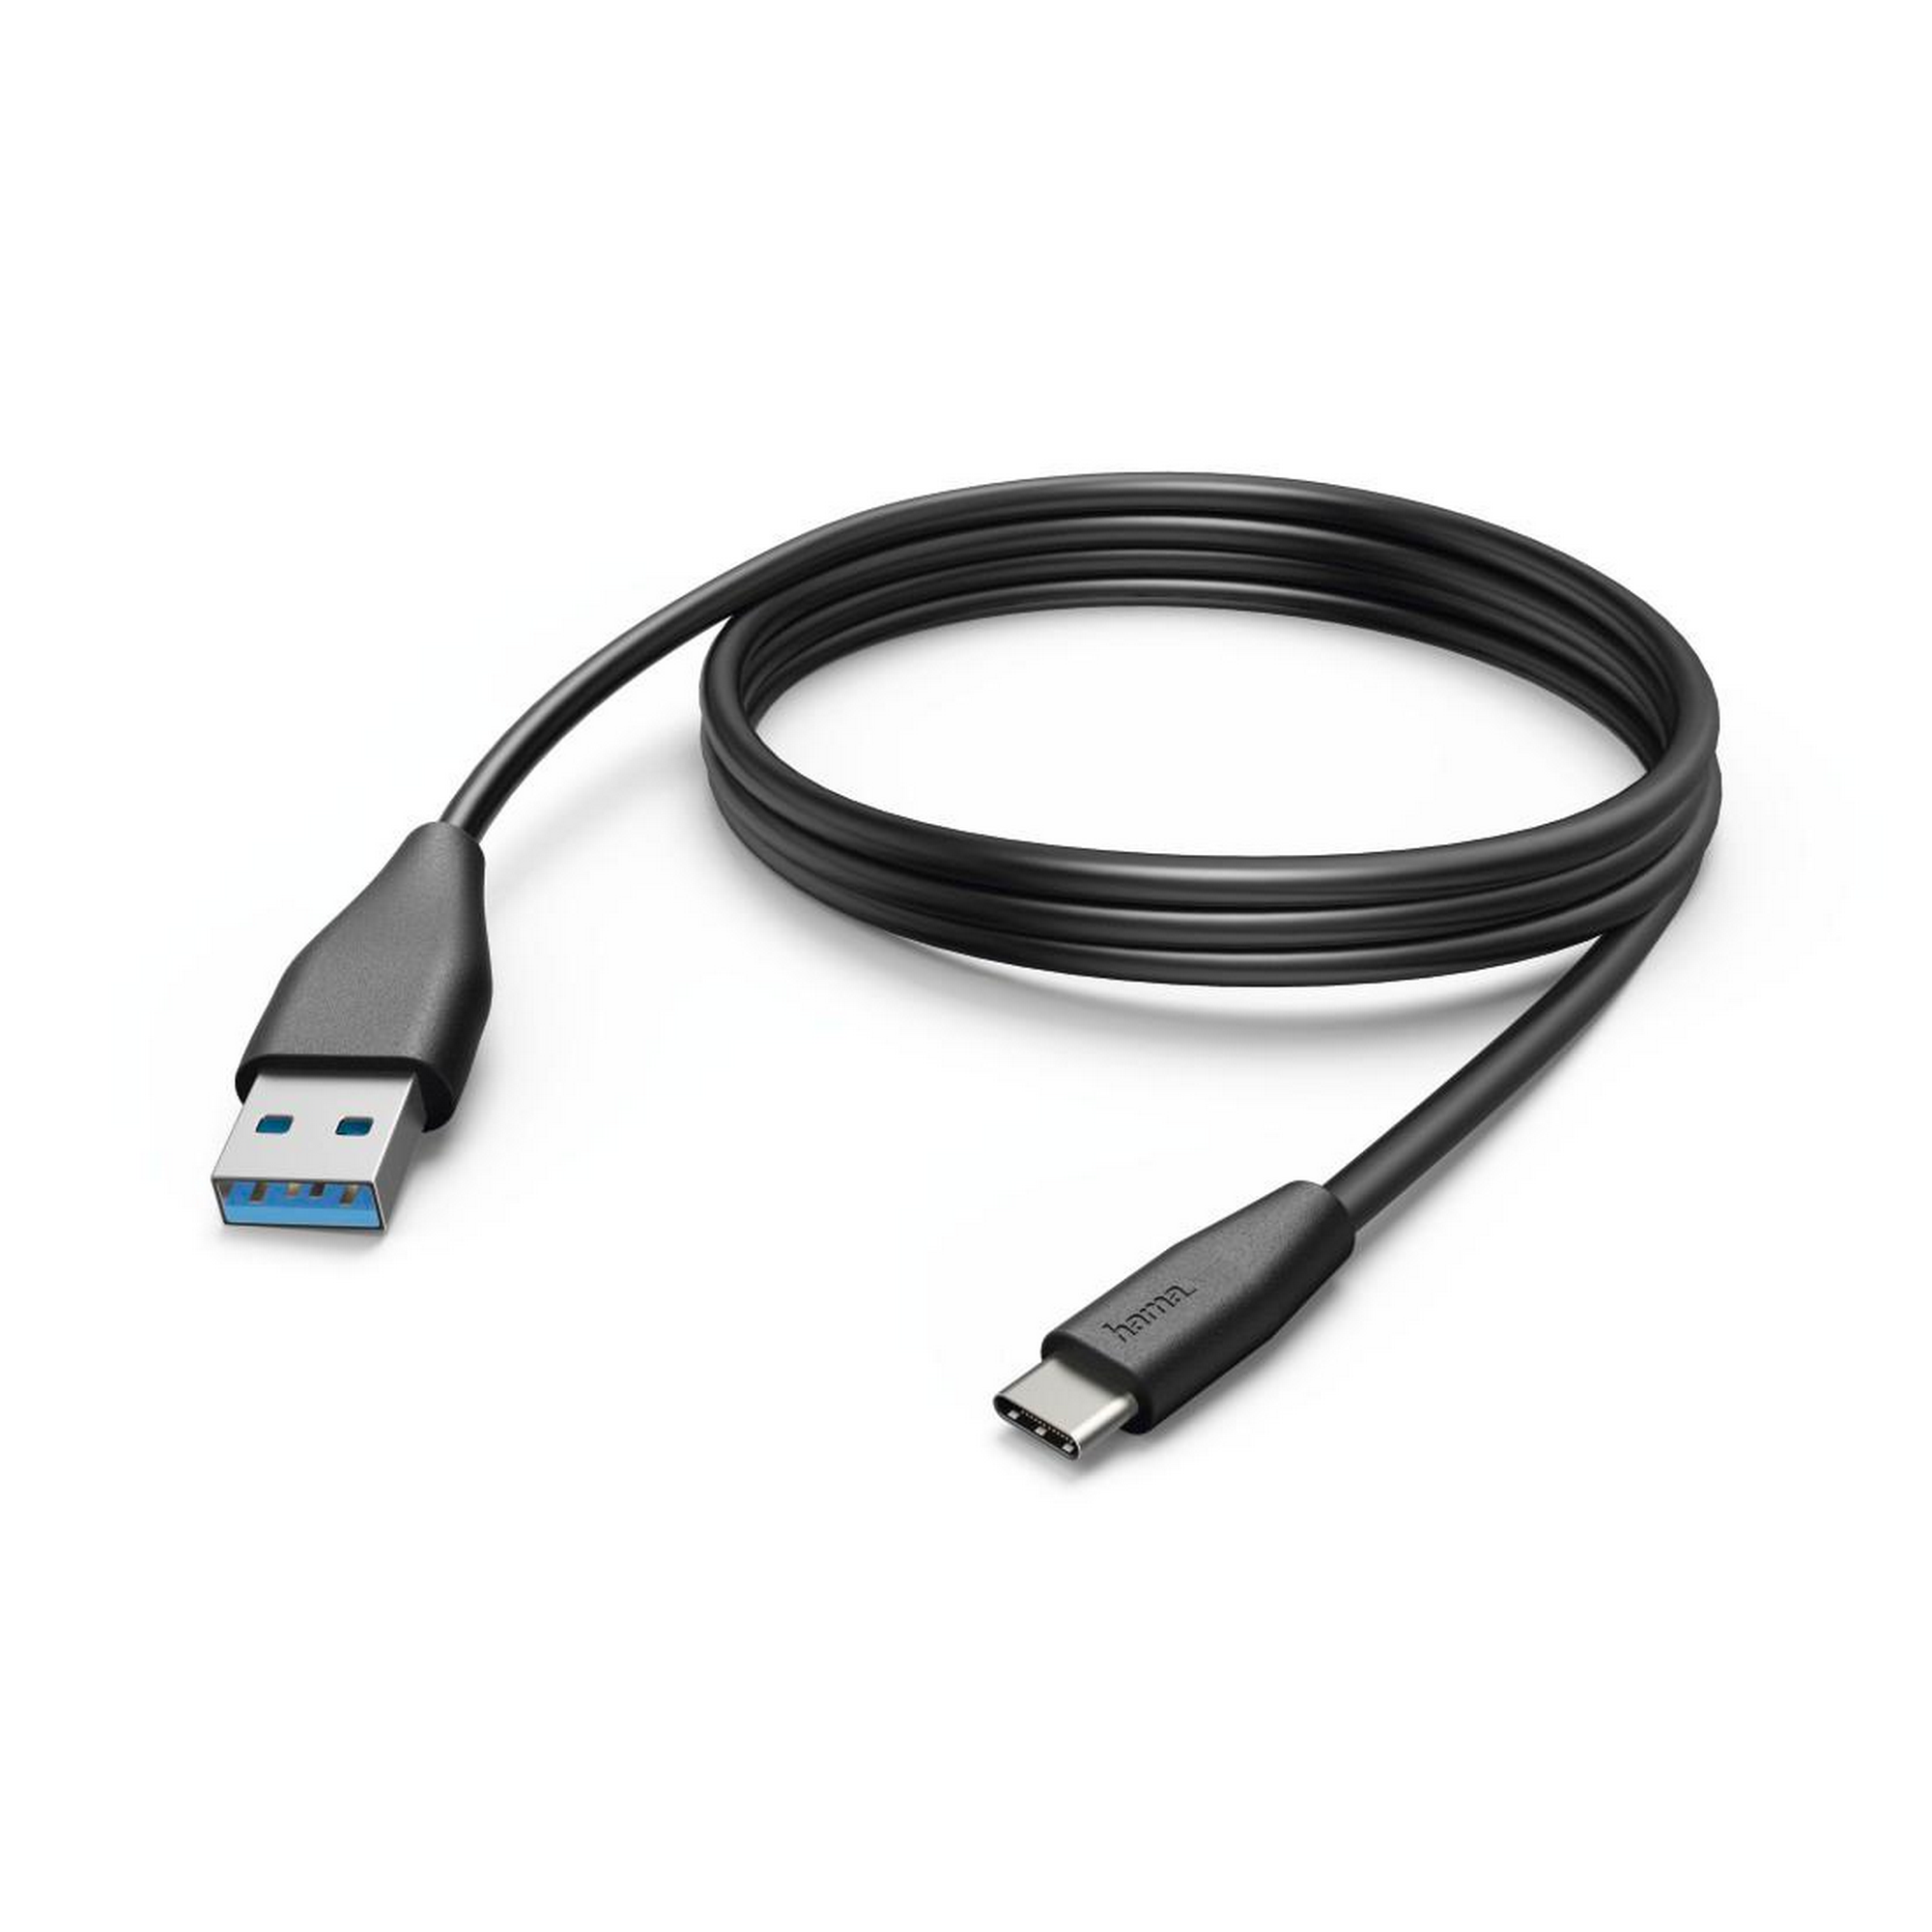 Lade-/Datenkabel schwarz USB-C/USB-A 3 m + product picture